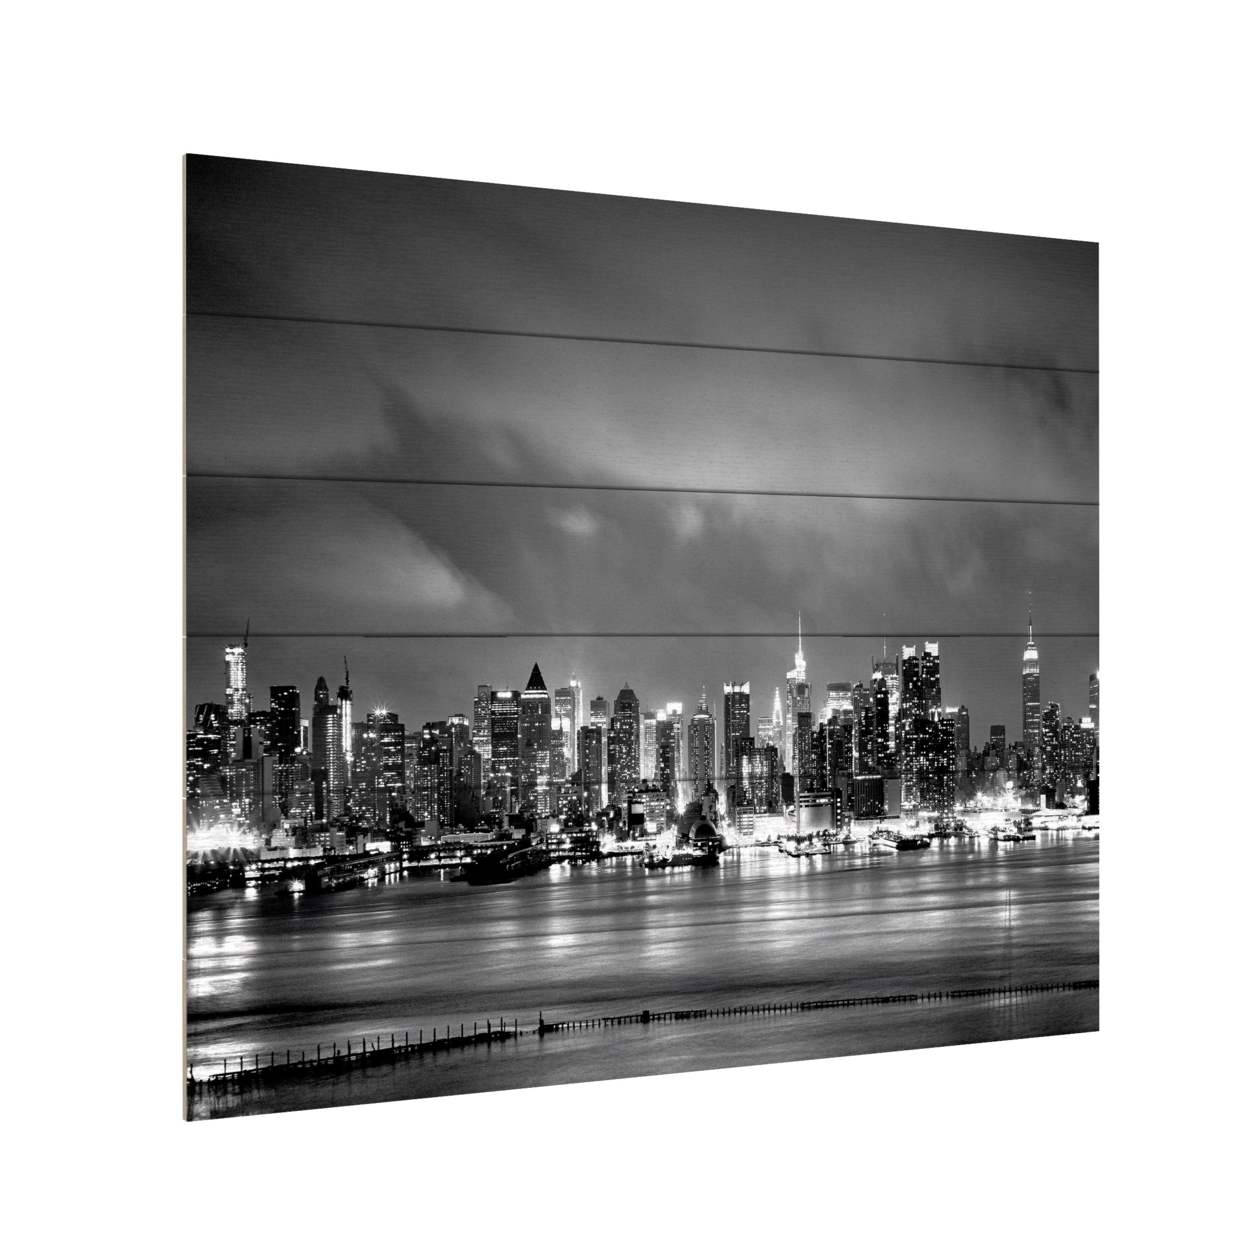 Wooden Slat Art 18 X 22 Inches Titled New York Skyline Ready To Hang Home Decor Picture